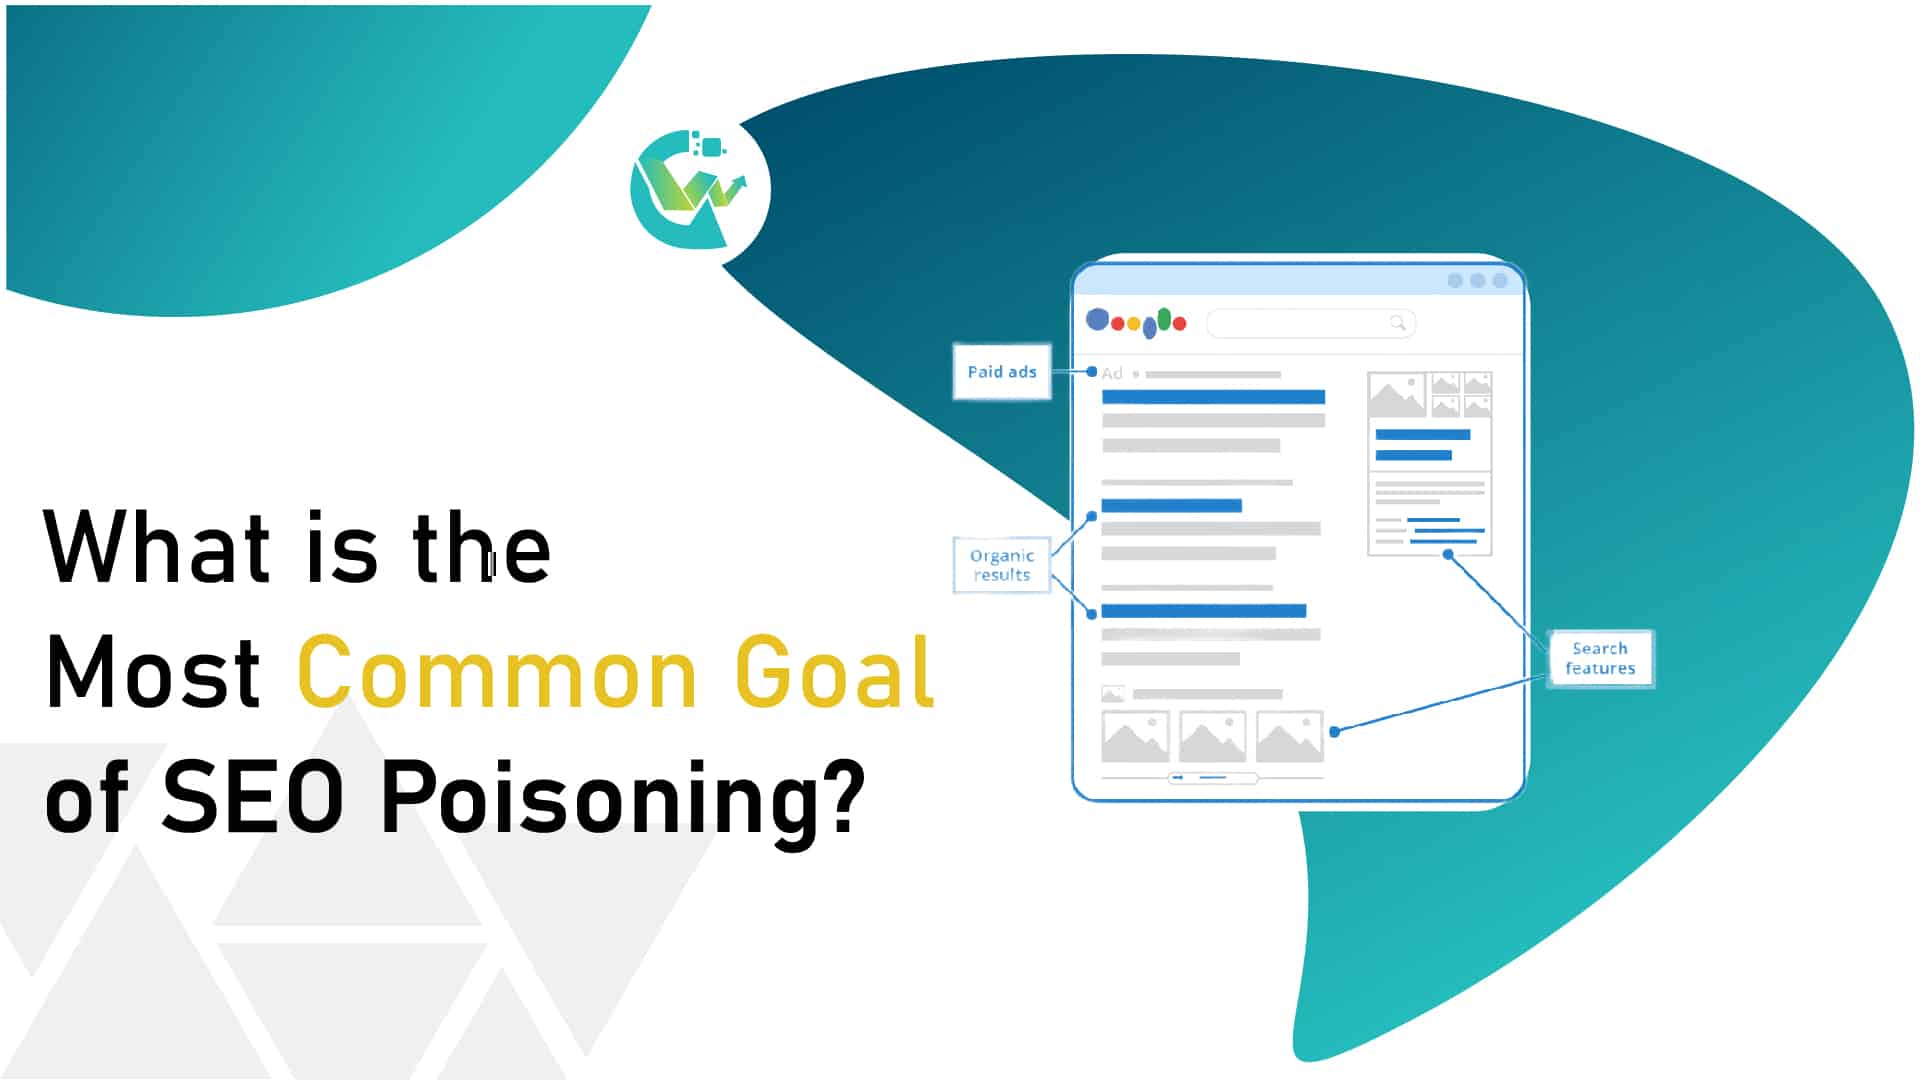 What is the most Common Goal of SEO Poisoning?